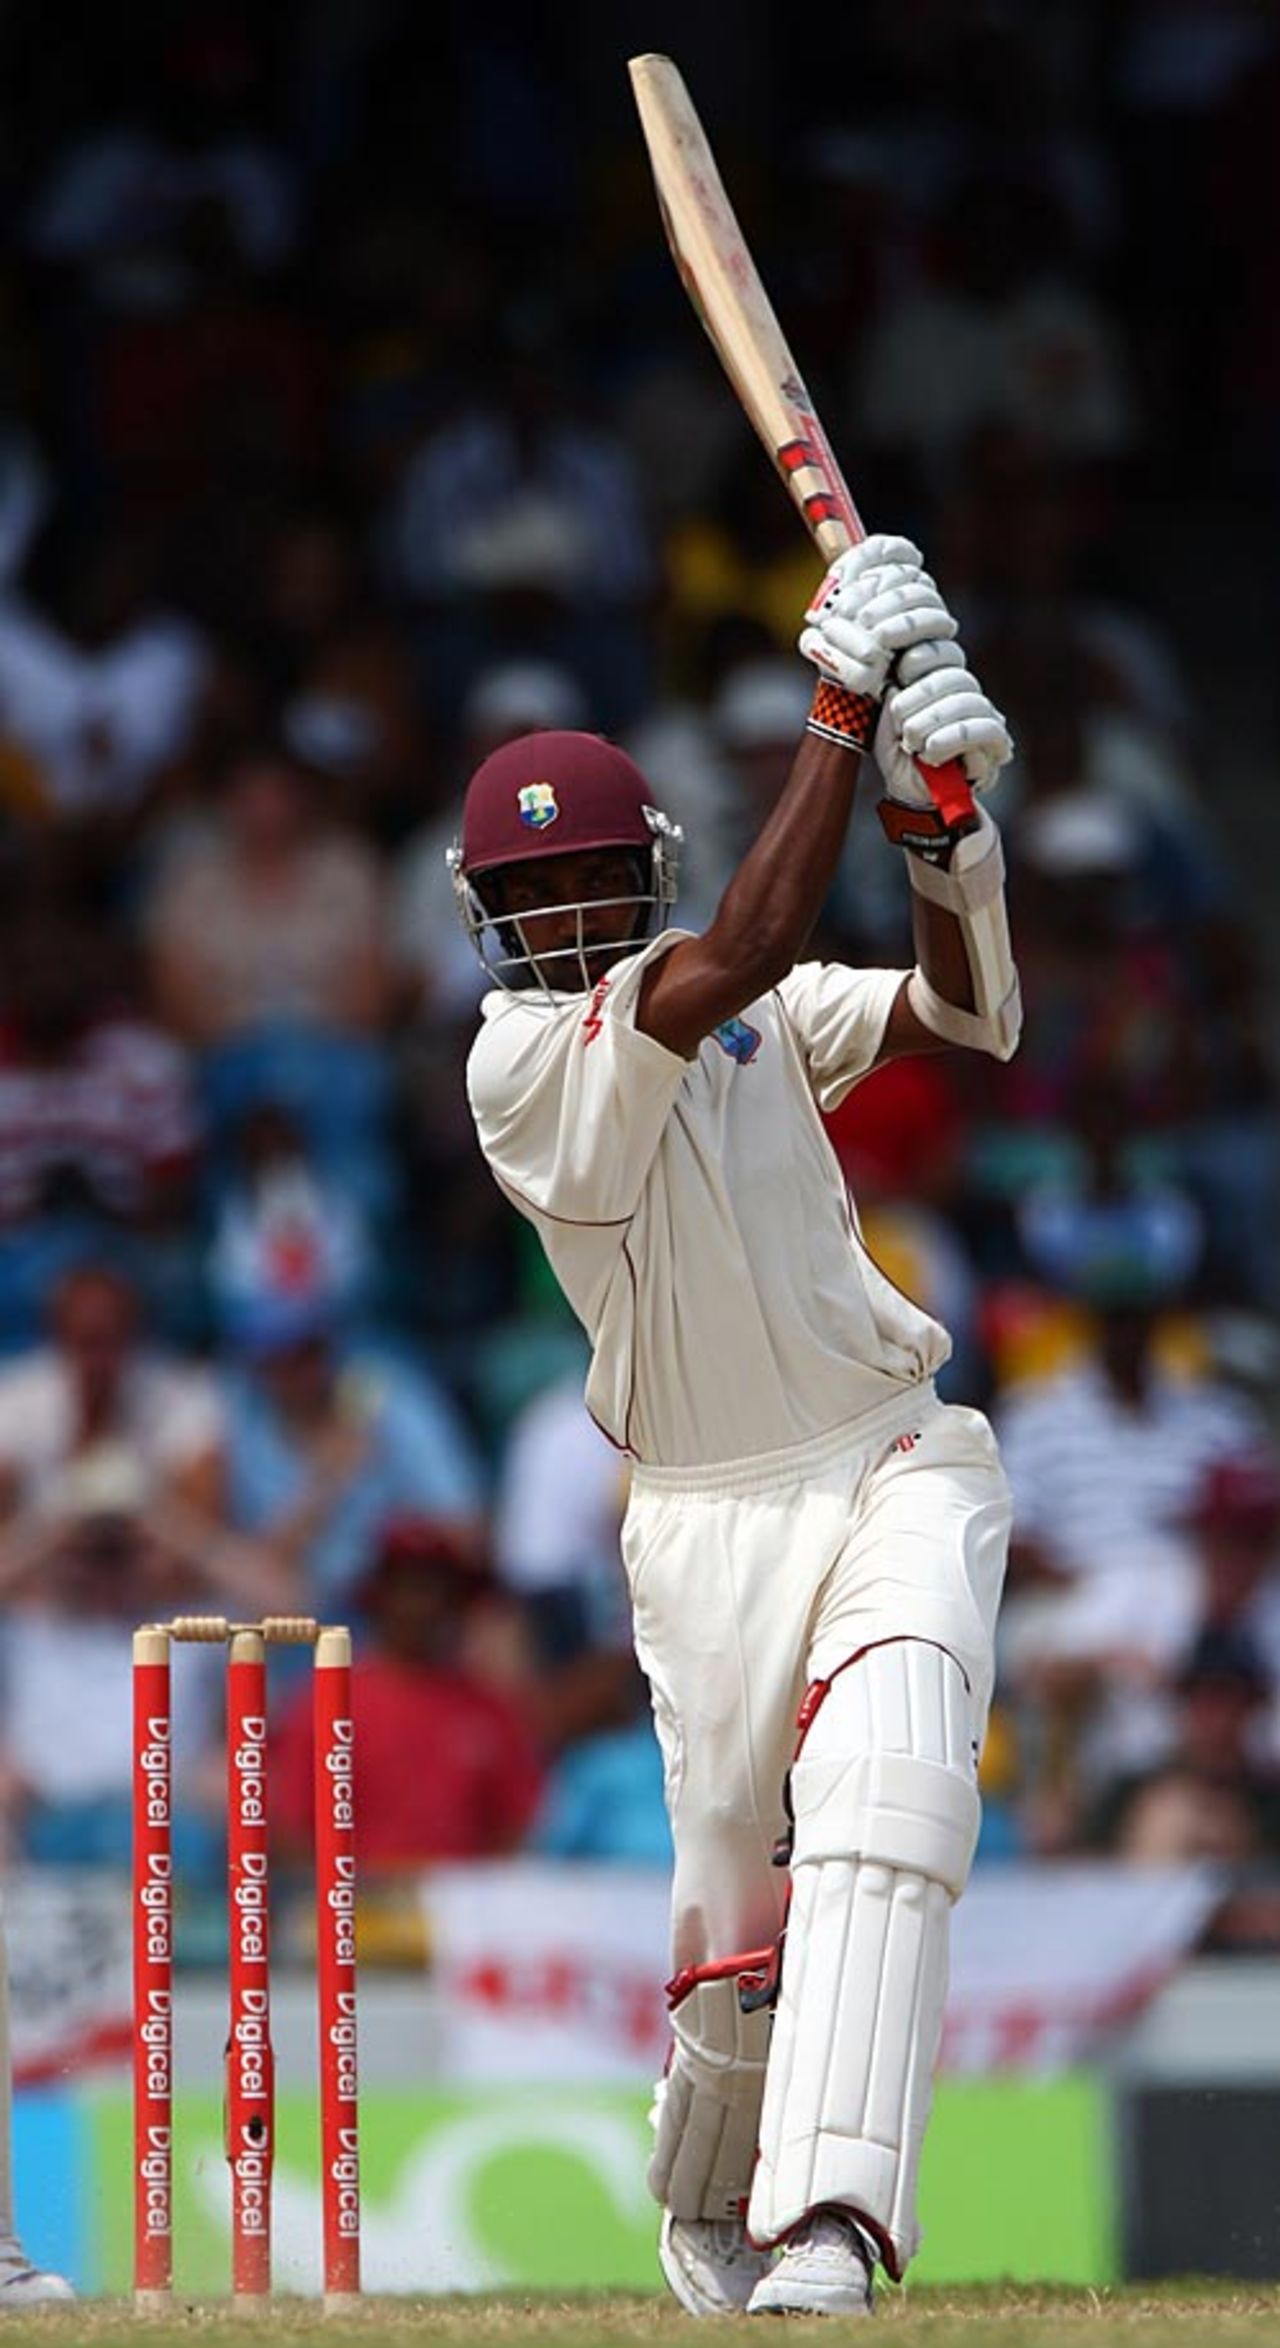 Denesh Ramdin powers his way to a hundred, West Indies v England, Barbados, 4th Test, March 1, 2009